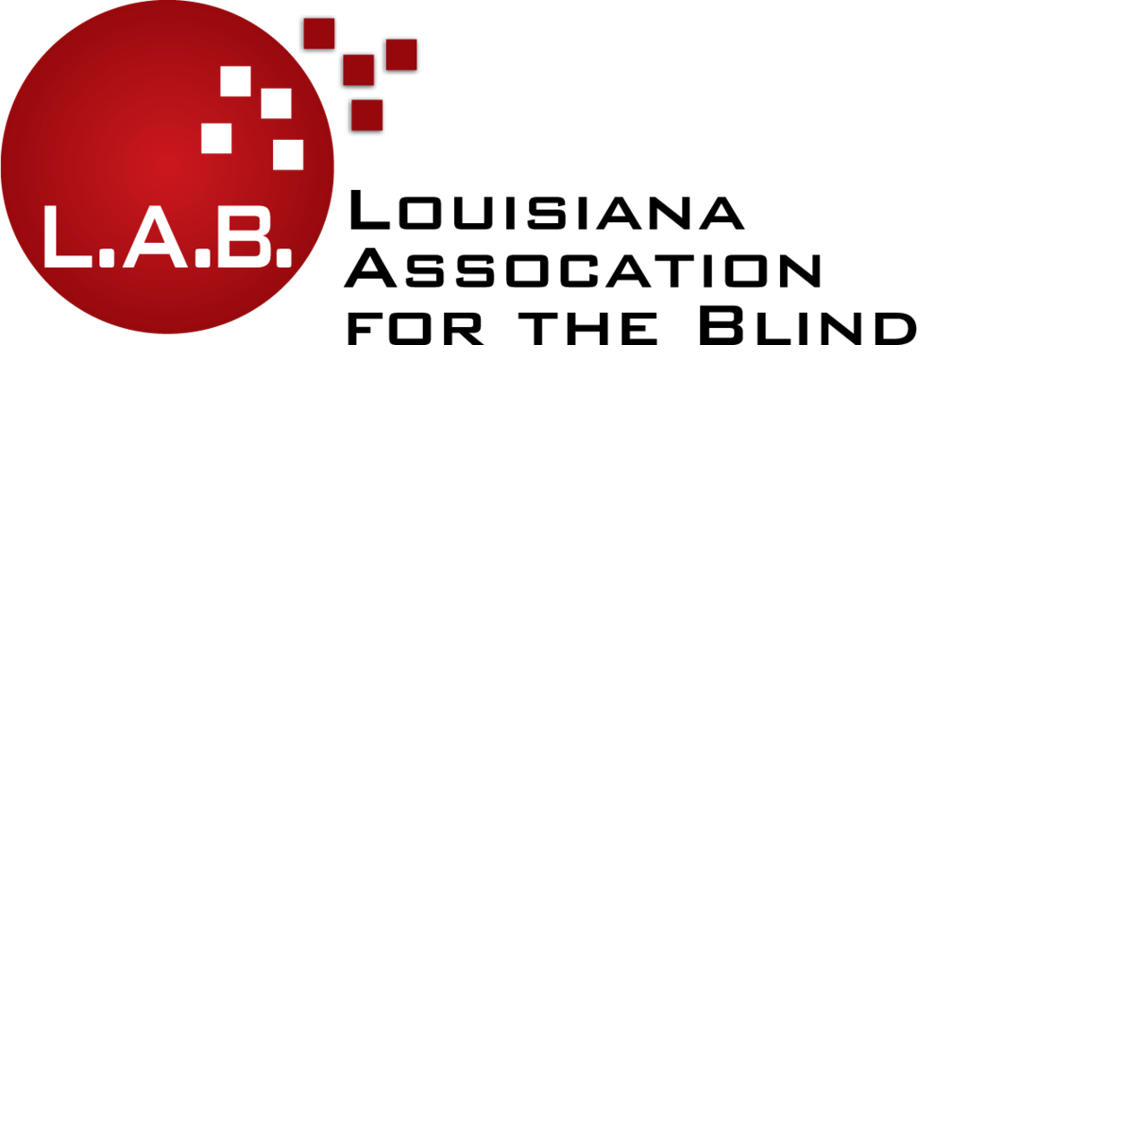 7530-01-398-2652) DUAL PURPOSE COPY PAPER - Louisiana Association For The  Blind